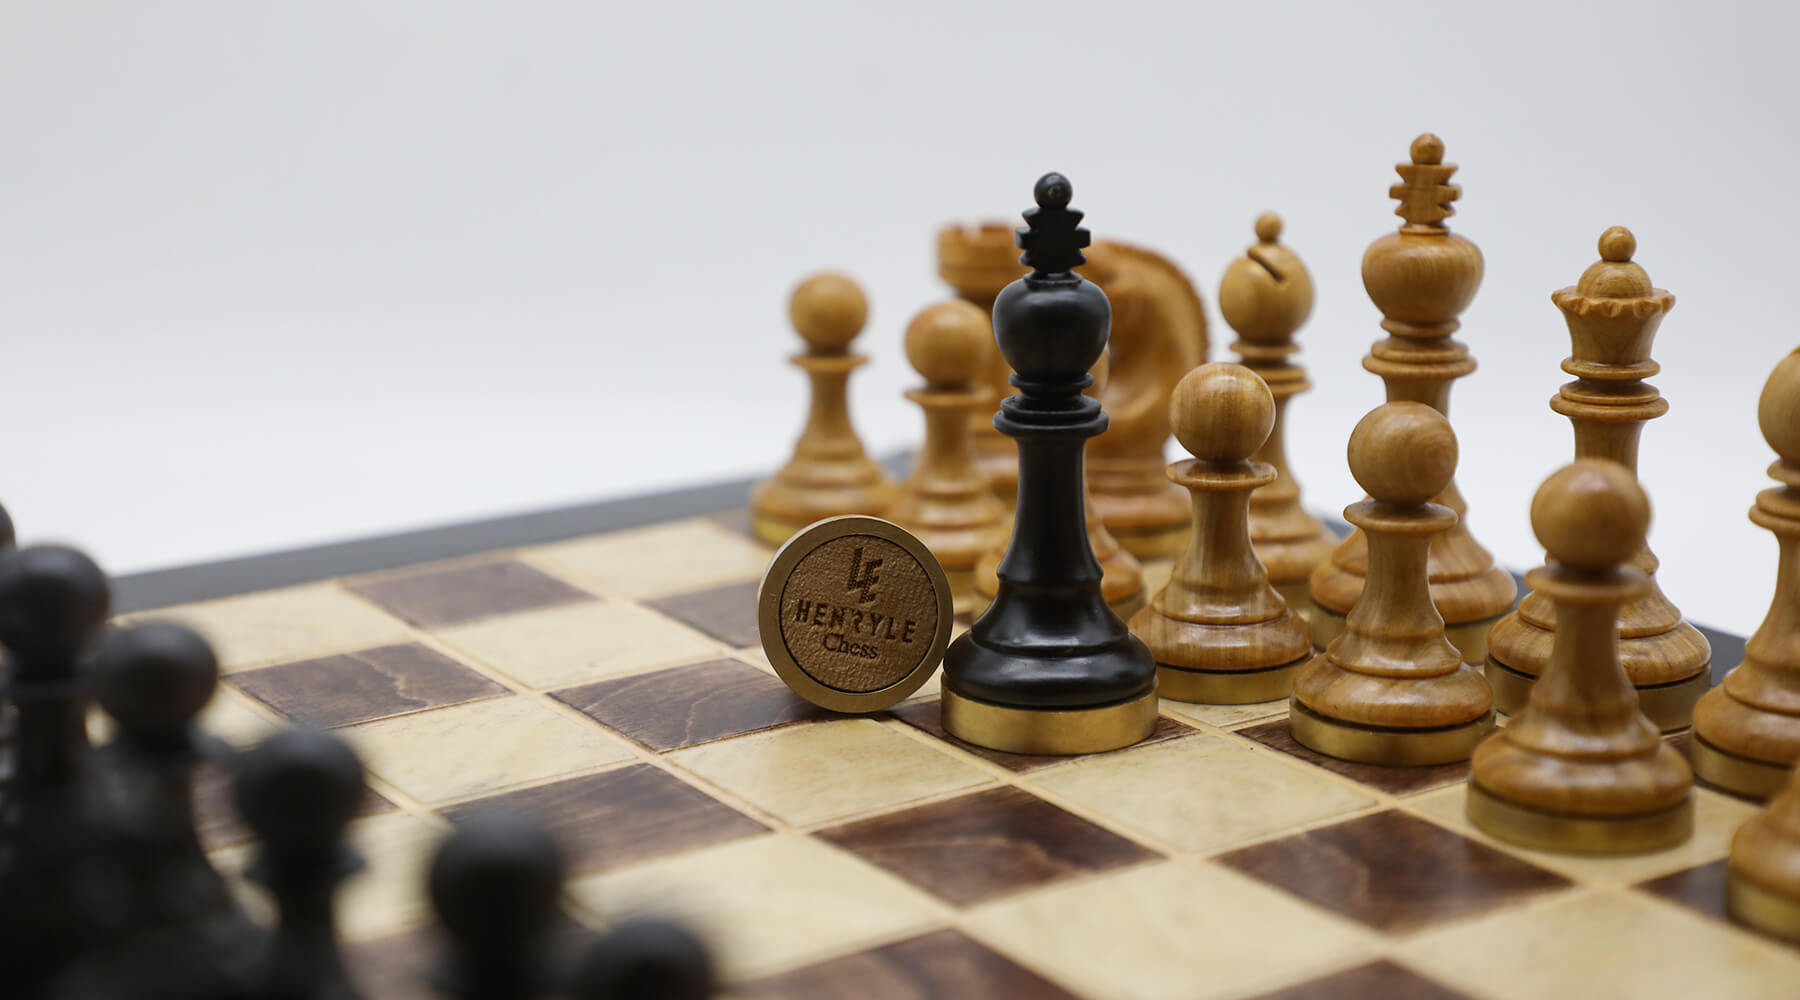 Unique Luxury Chess Sets with High End Boards & Pieces - Henry Chess Sets